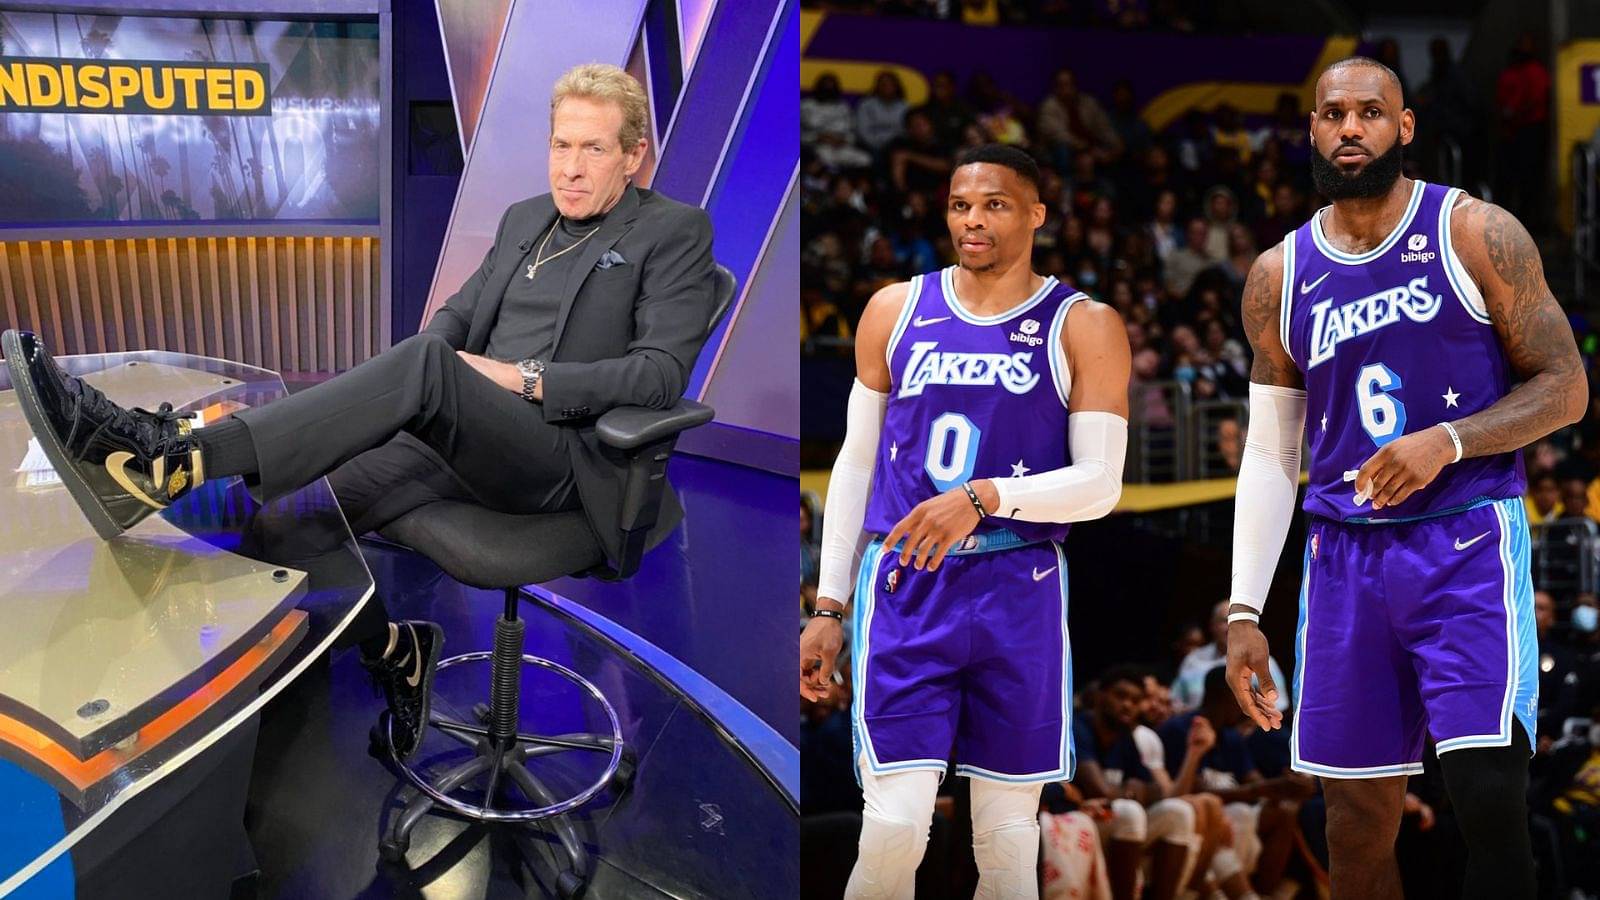 "Russell Westbrook exits the game on the night he was asked to play second fiddle. So it begins": Skip Bayless decides to create his own spin on the polarizing Lakers man